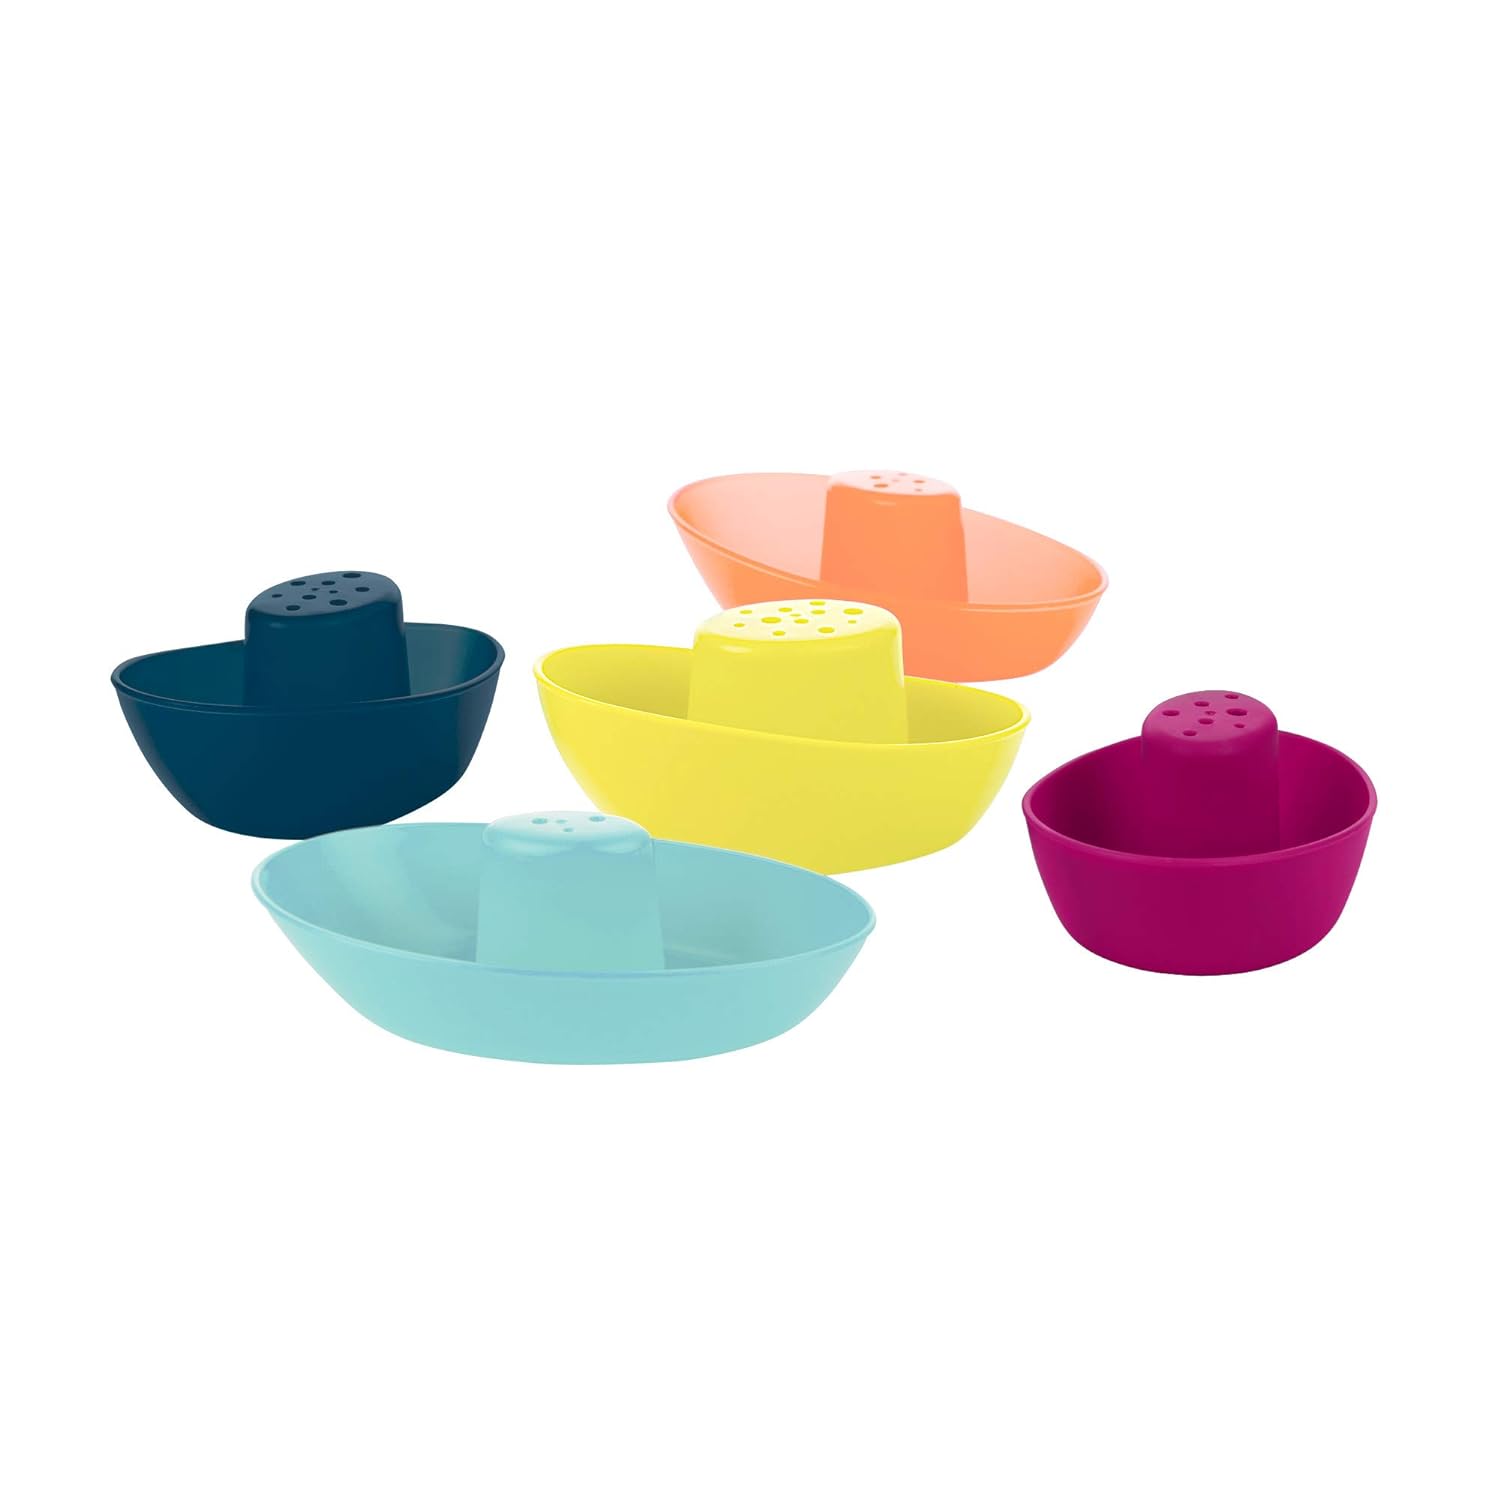 Boon - Fleet Stacking Boats Bath Toy - Multicolor